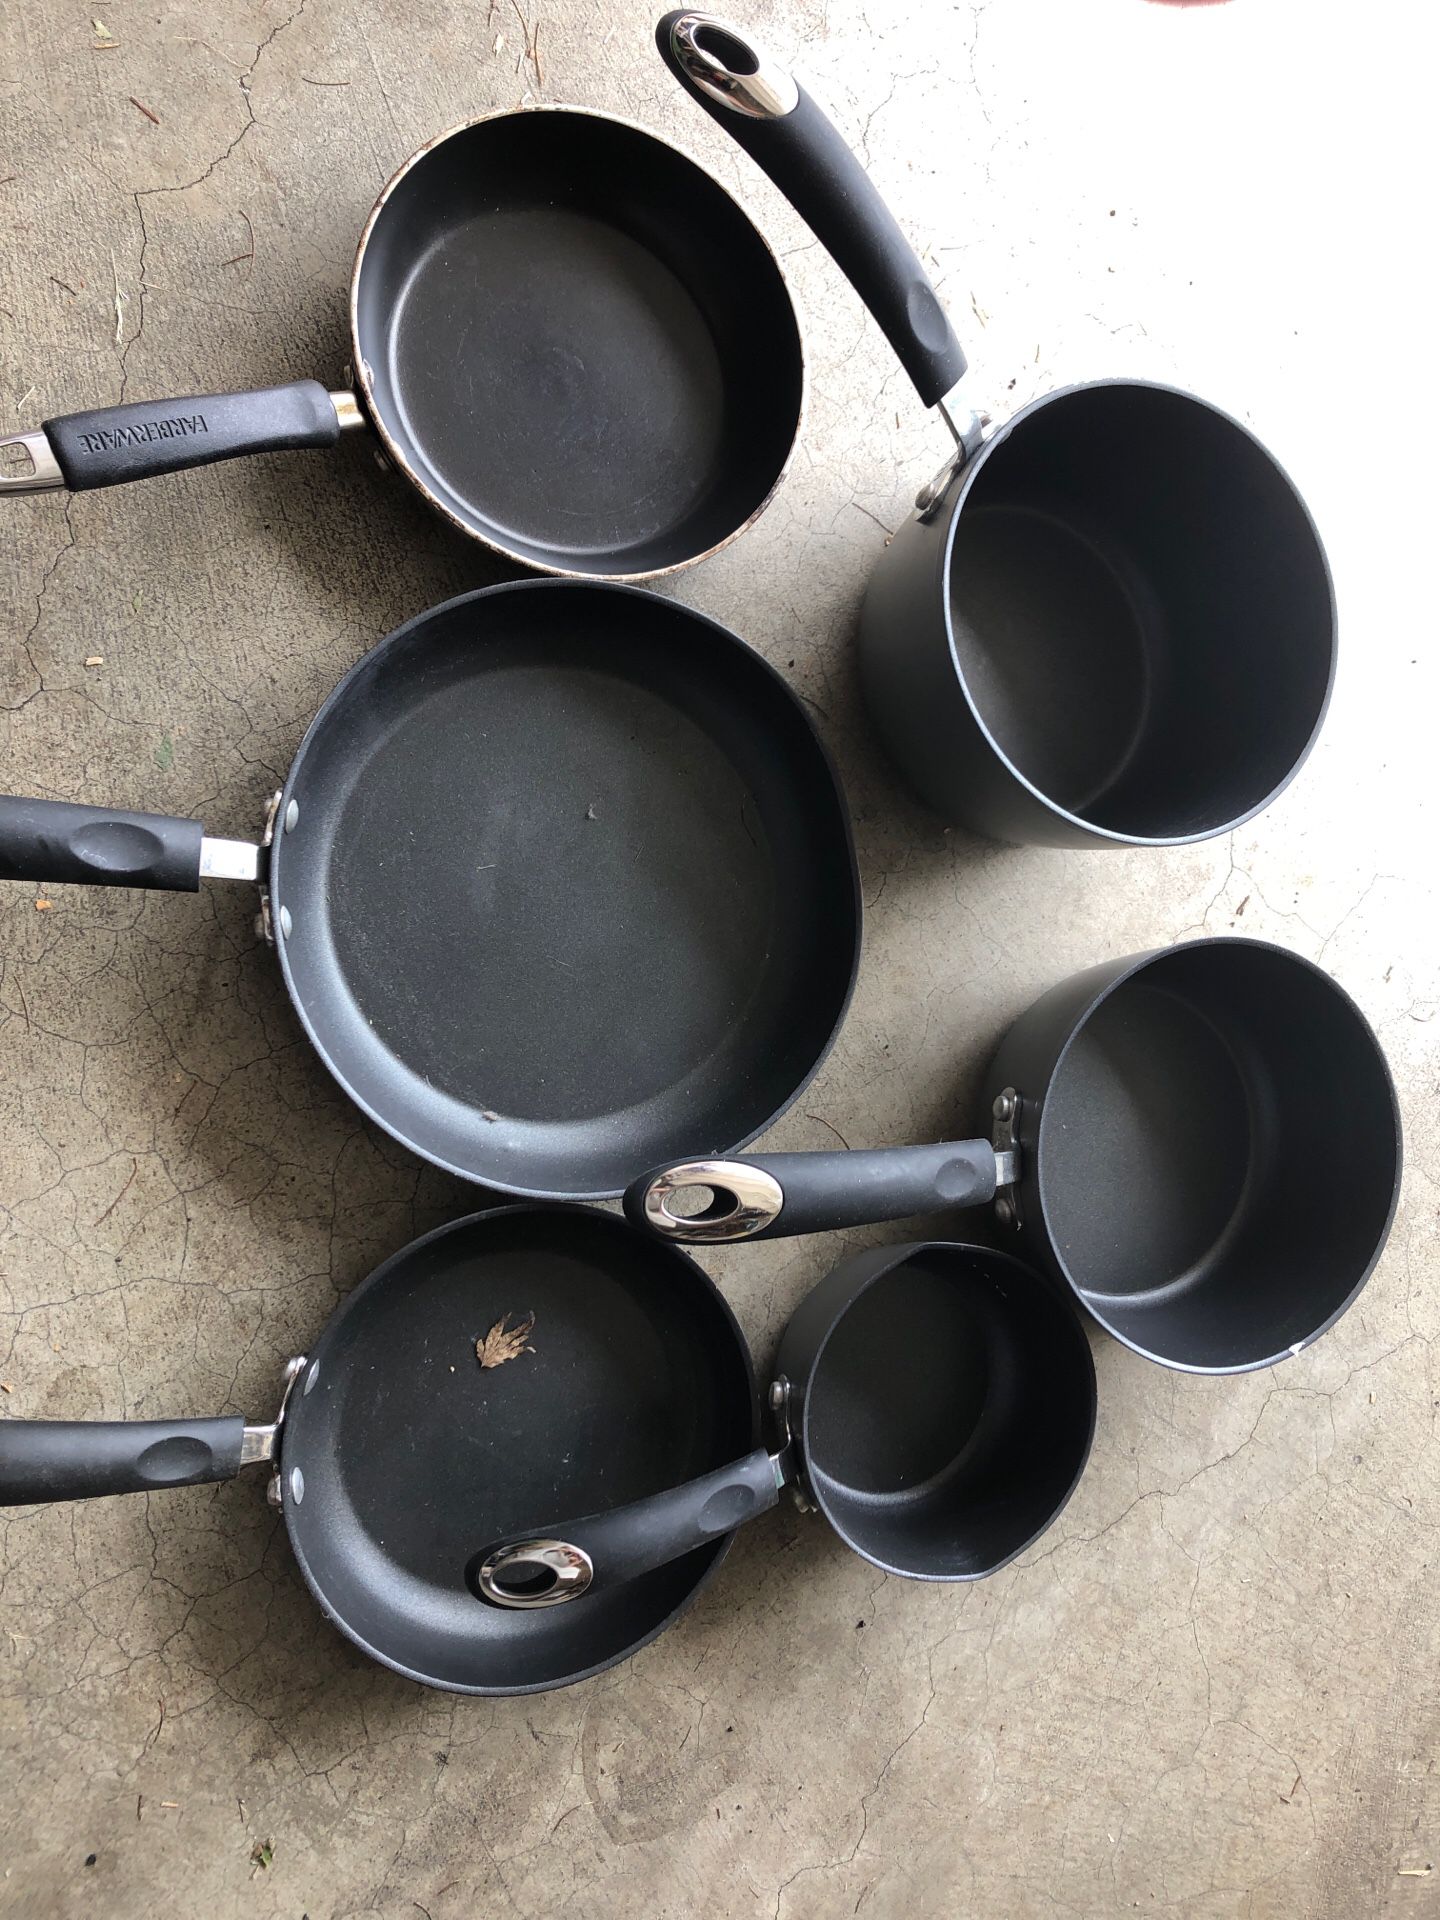 Fry pans and cook ware